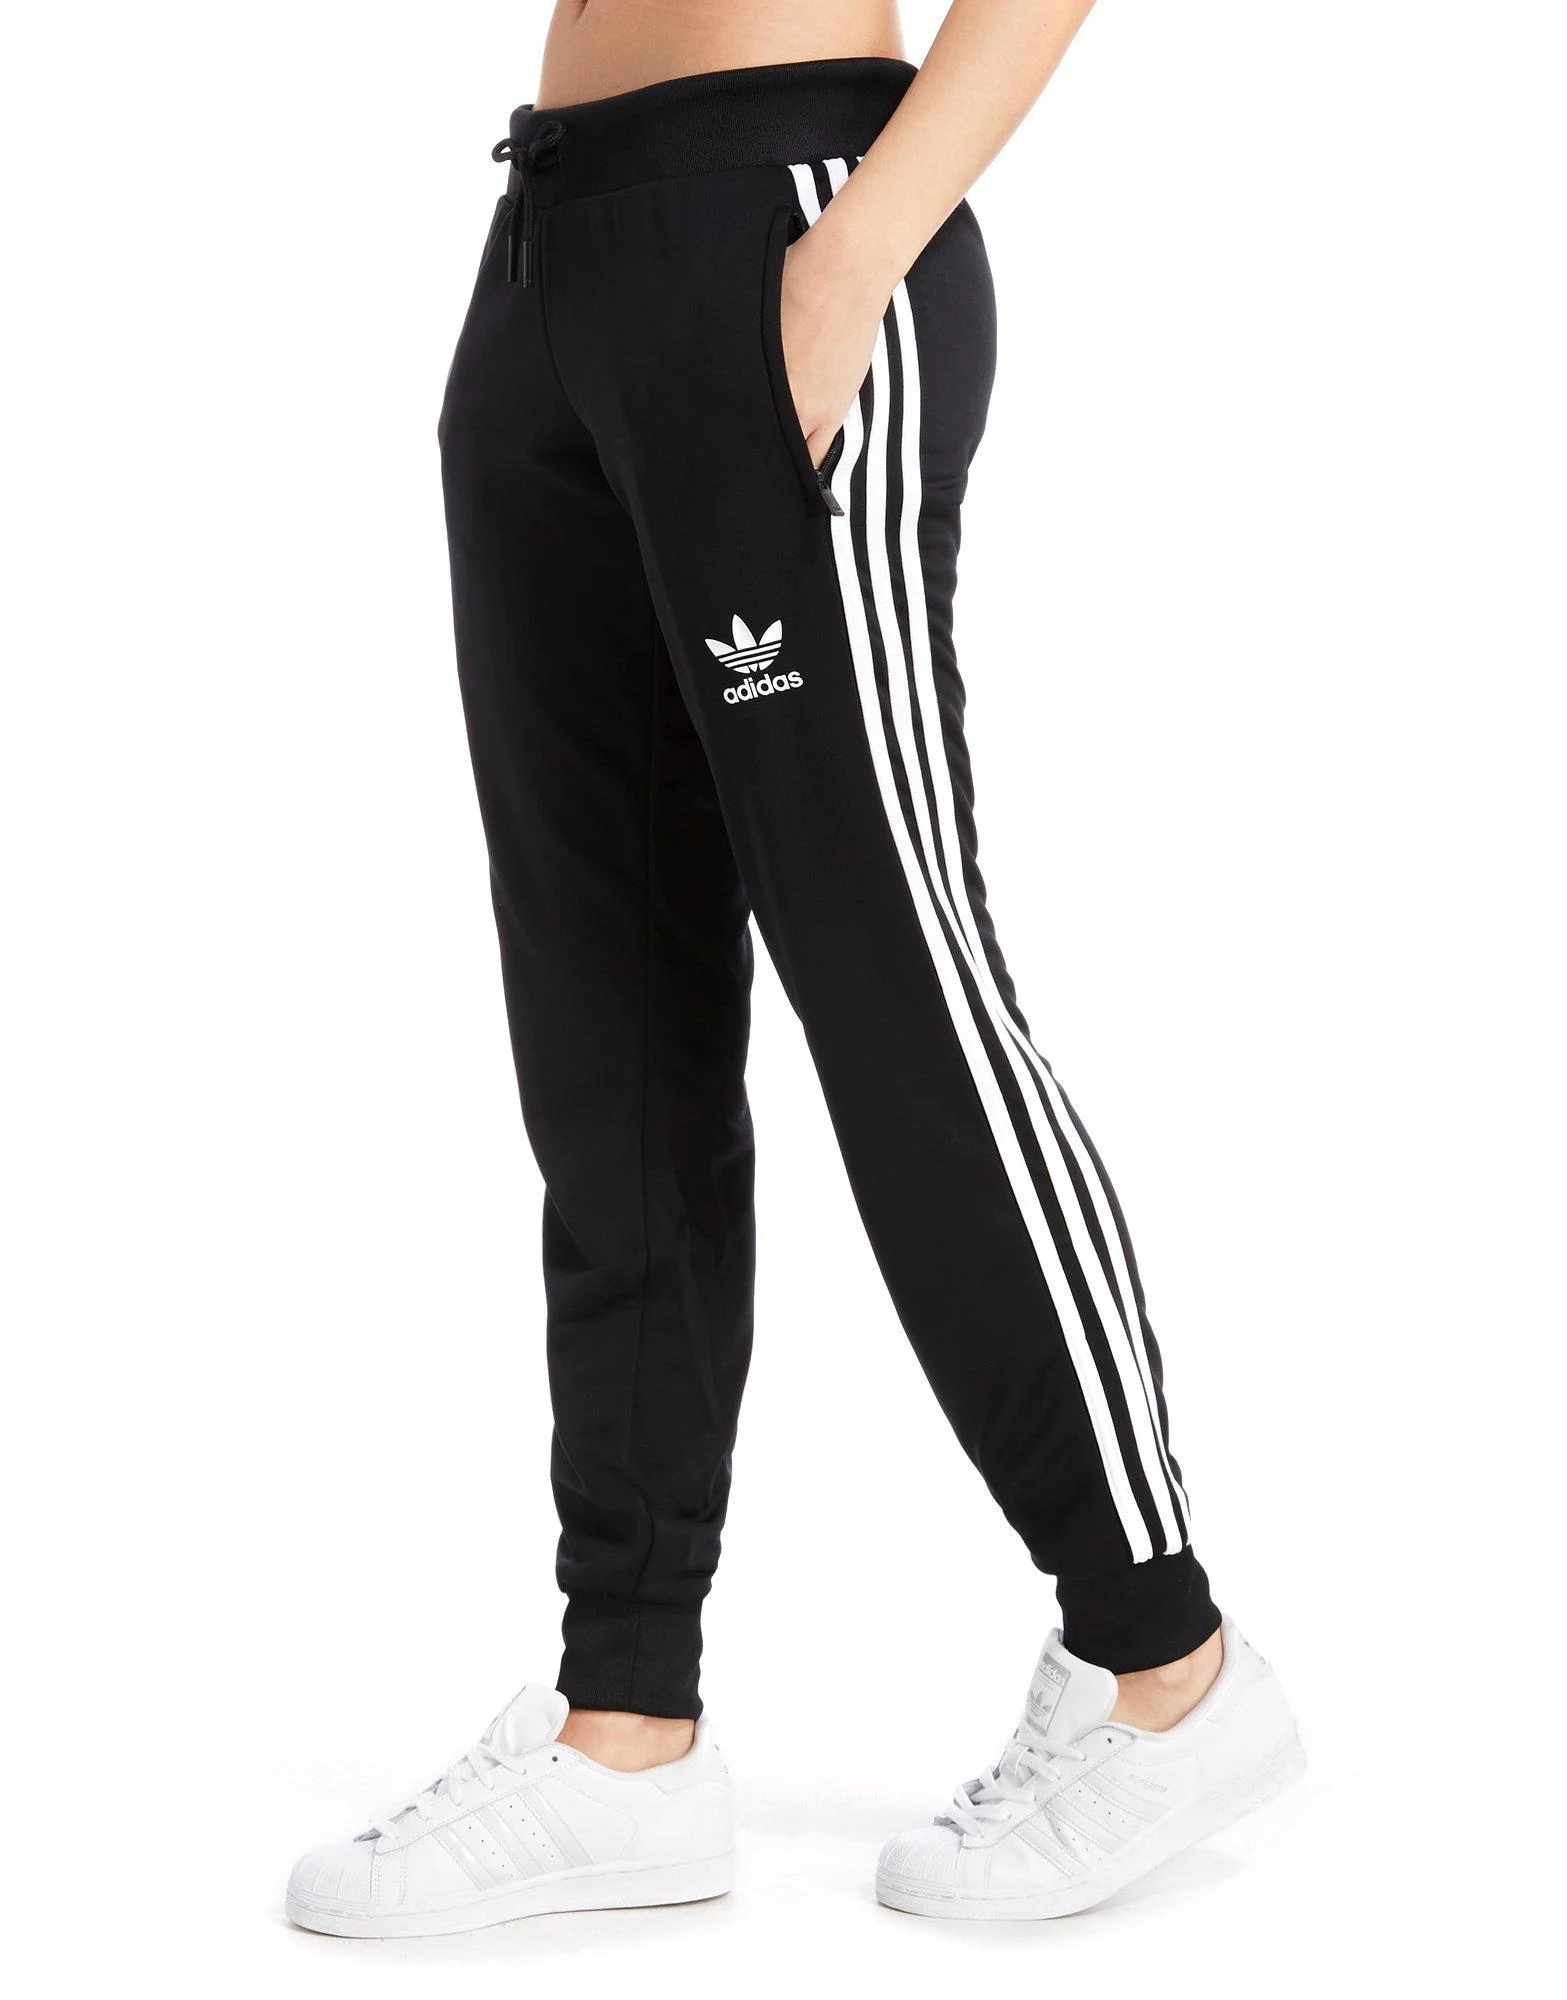 Adidas Casual Pants: Sporty Comfort, Urban Style, and Iconic Three Stripes